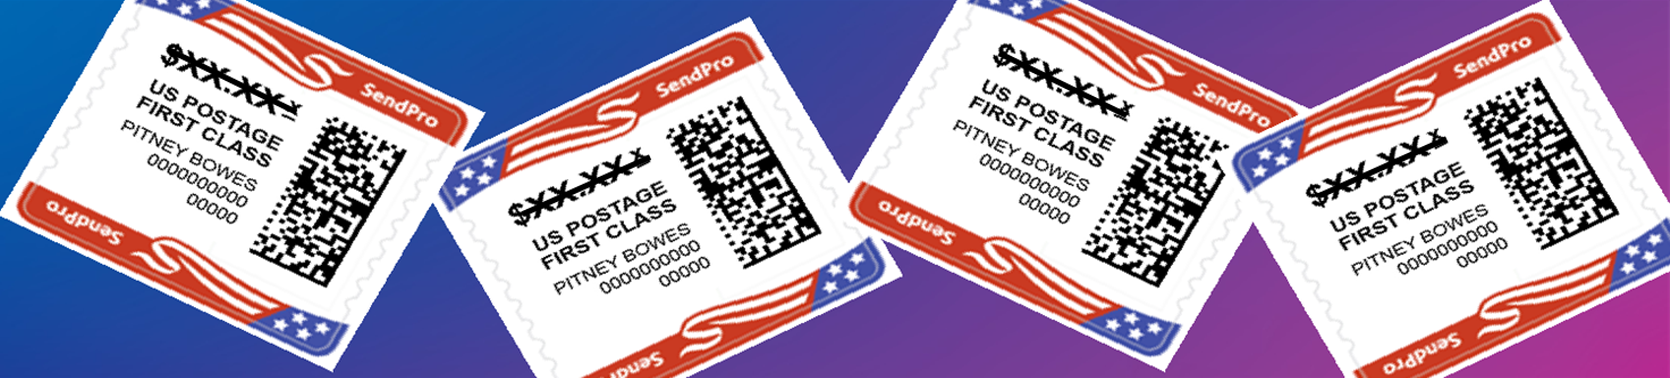 Print USPS® stamps with the SendPro®/PitneyShip™ solution